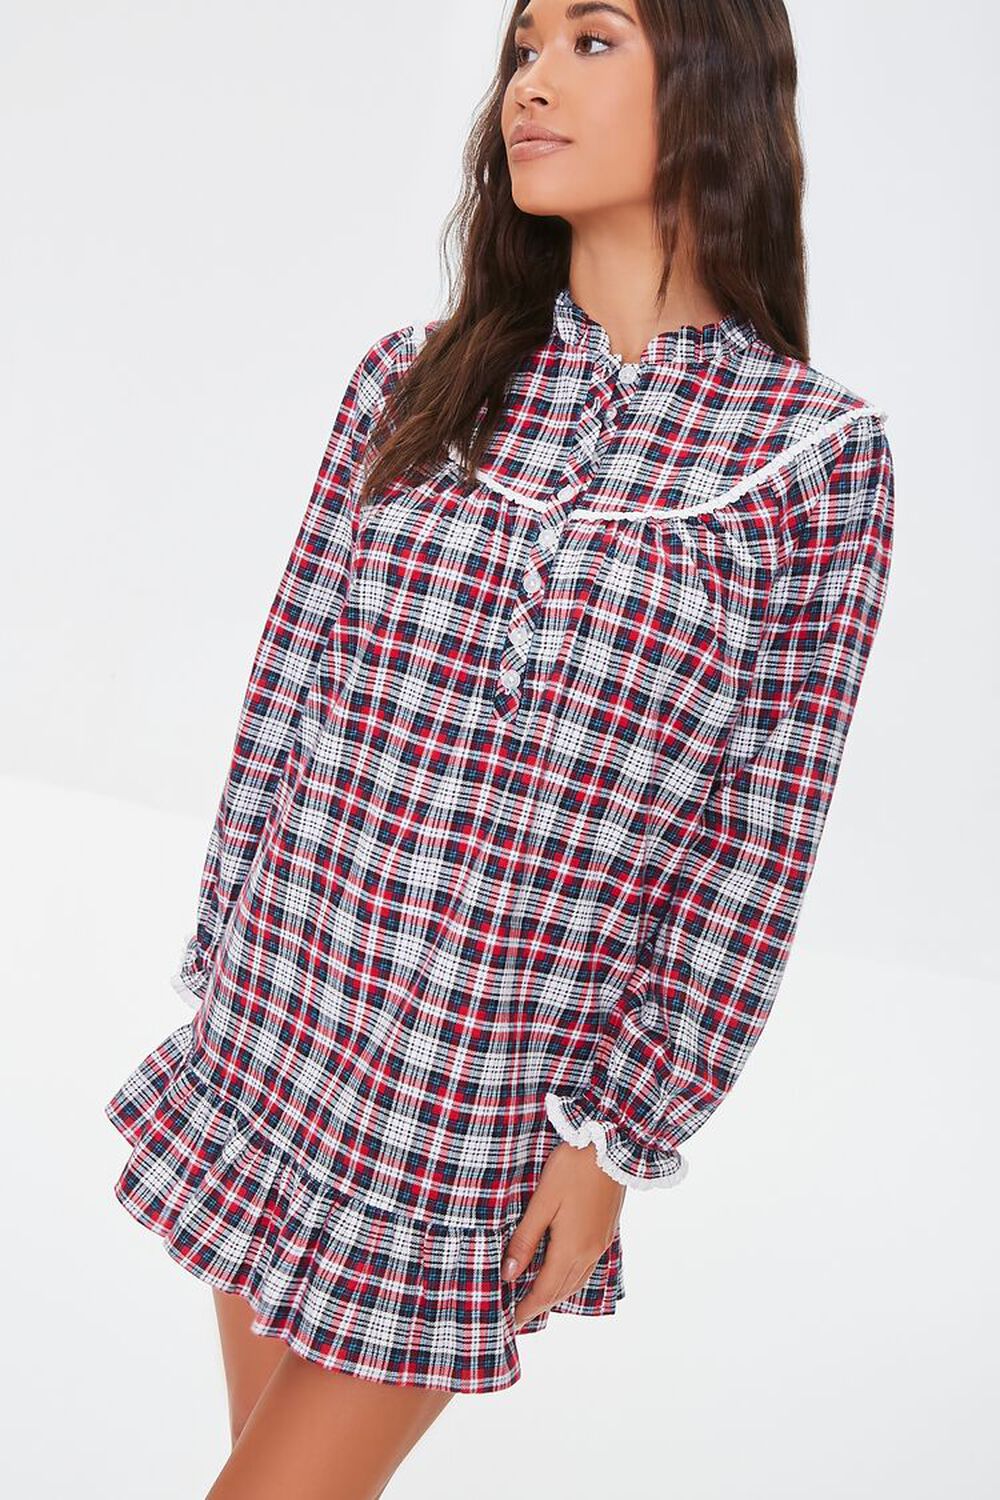 RED/WHITE Plaid Flannel Nightgown, image 1